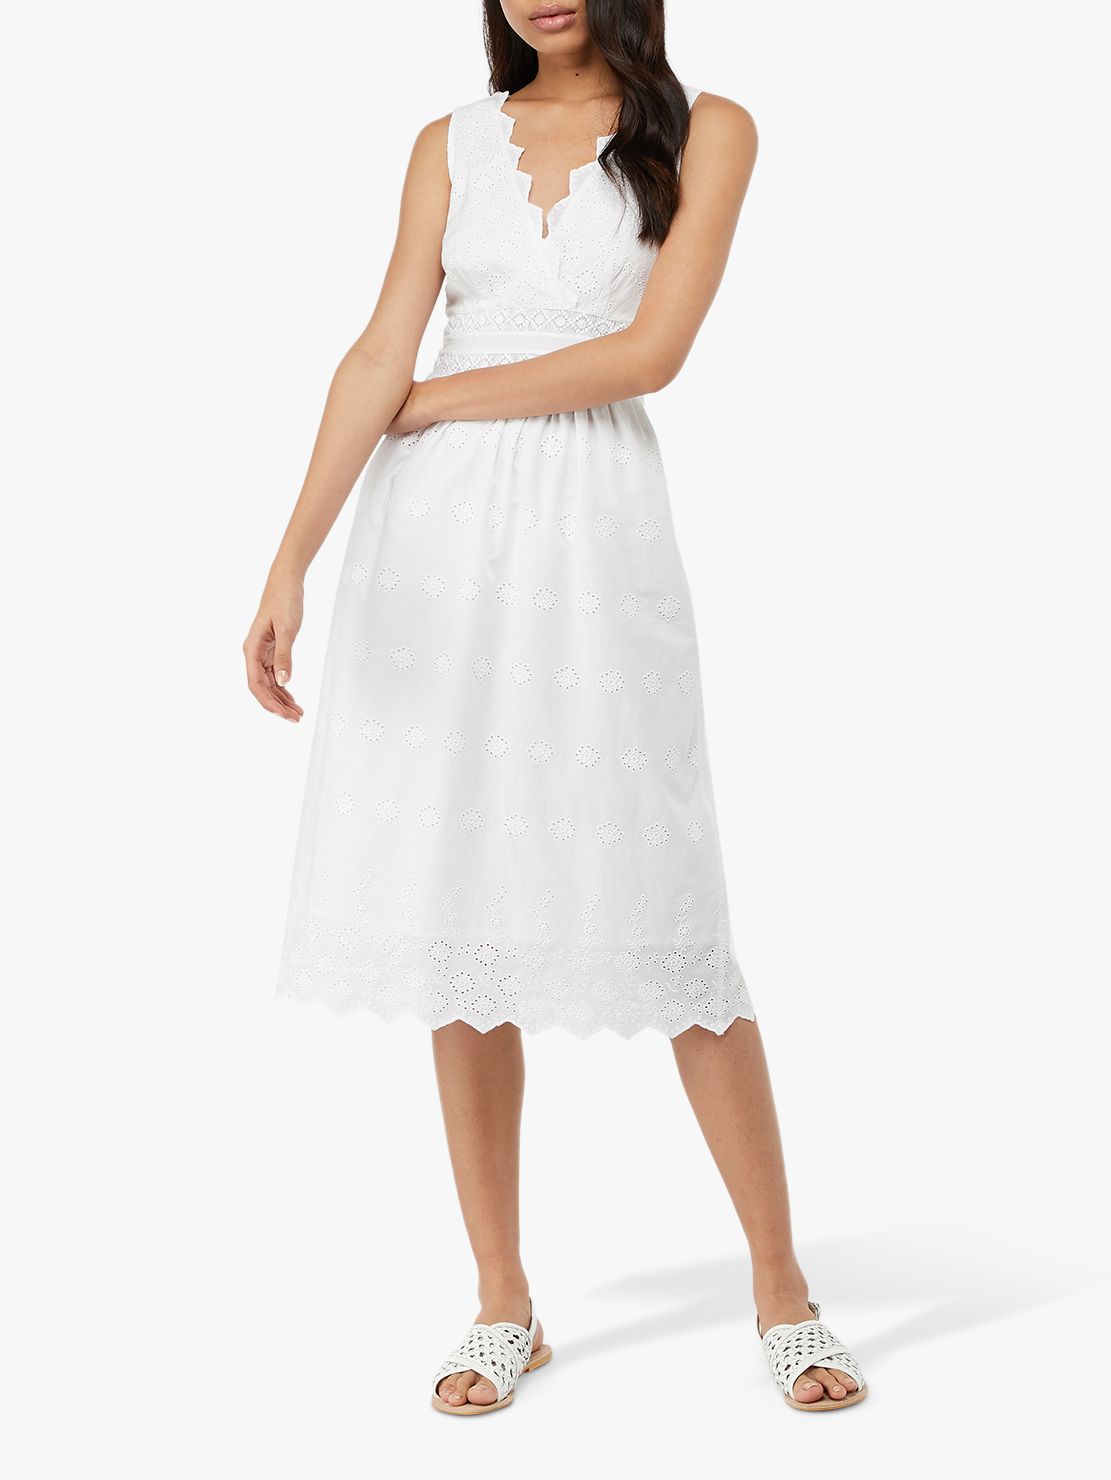 Monsoon Axel Broderie Dress, White at 